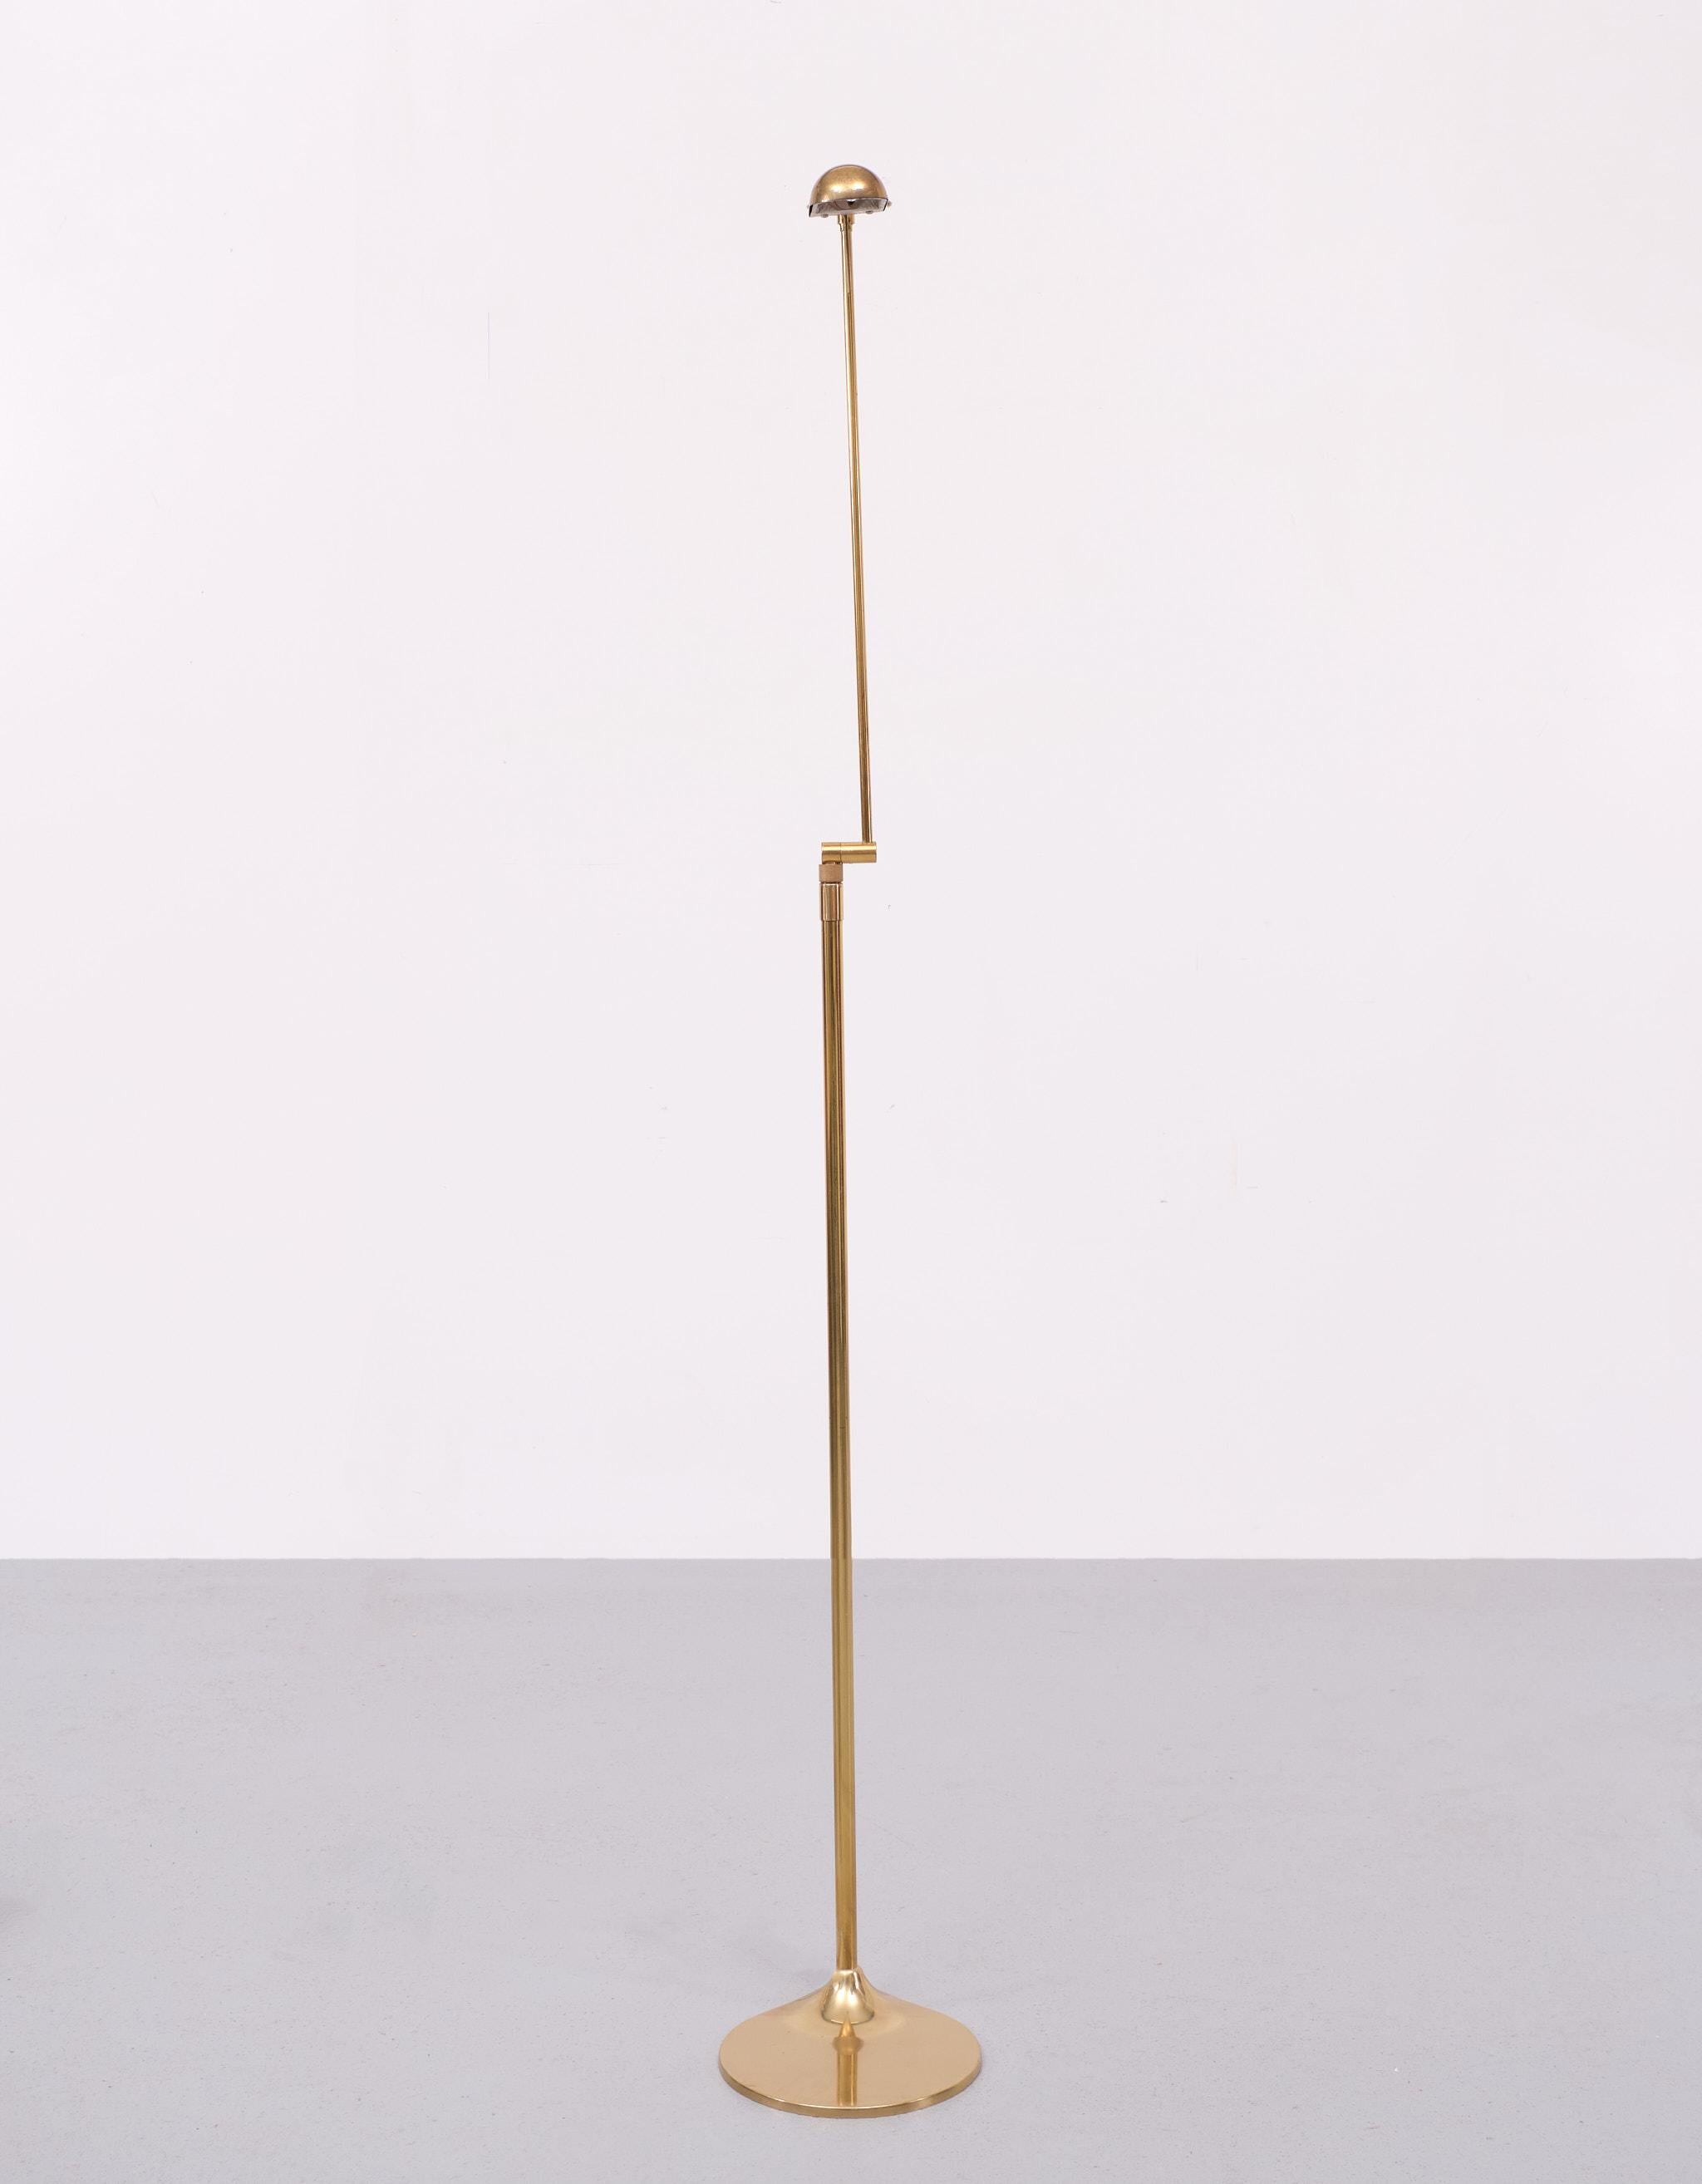 Very nice Ben Demmers Halogen Floor lamp. . Brass ,adjustable in height 
nice sleek design . good working dimmer . Just the right amount of  patine 

Please don't hesitate to reach out for alternative shipping quote